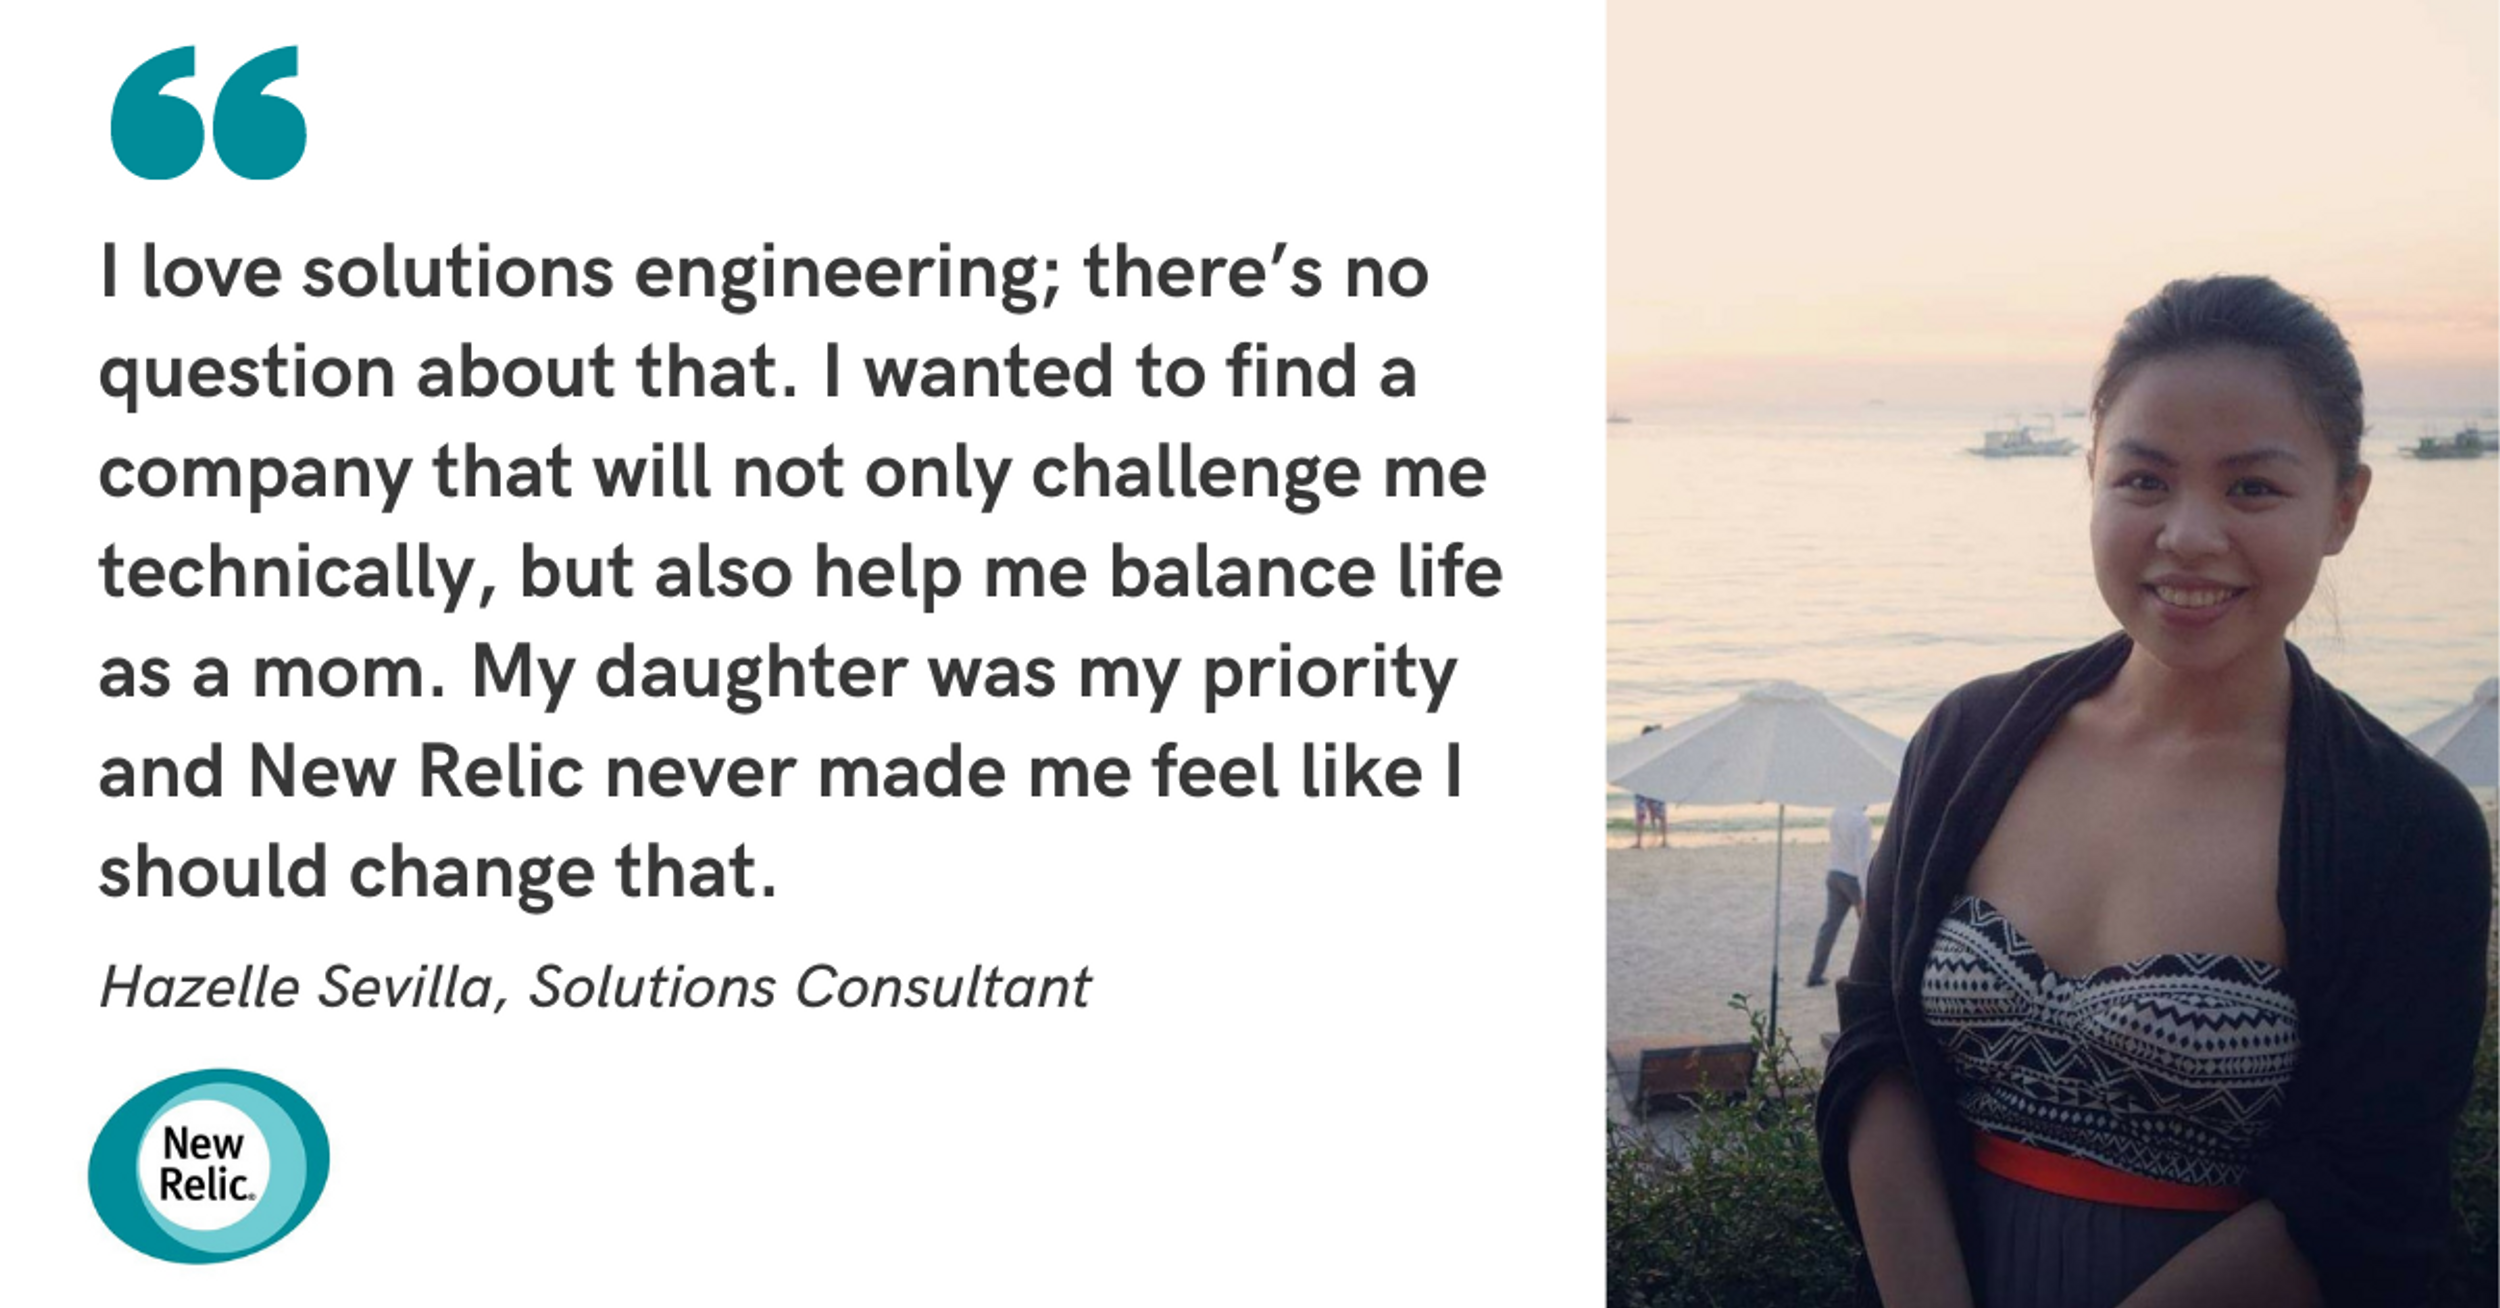 How This New Mom Found The Support She Needed to Pursue Her Dream Job at New Relic